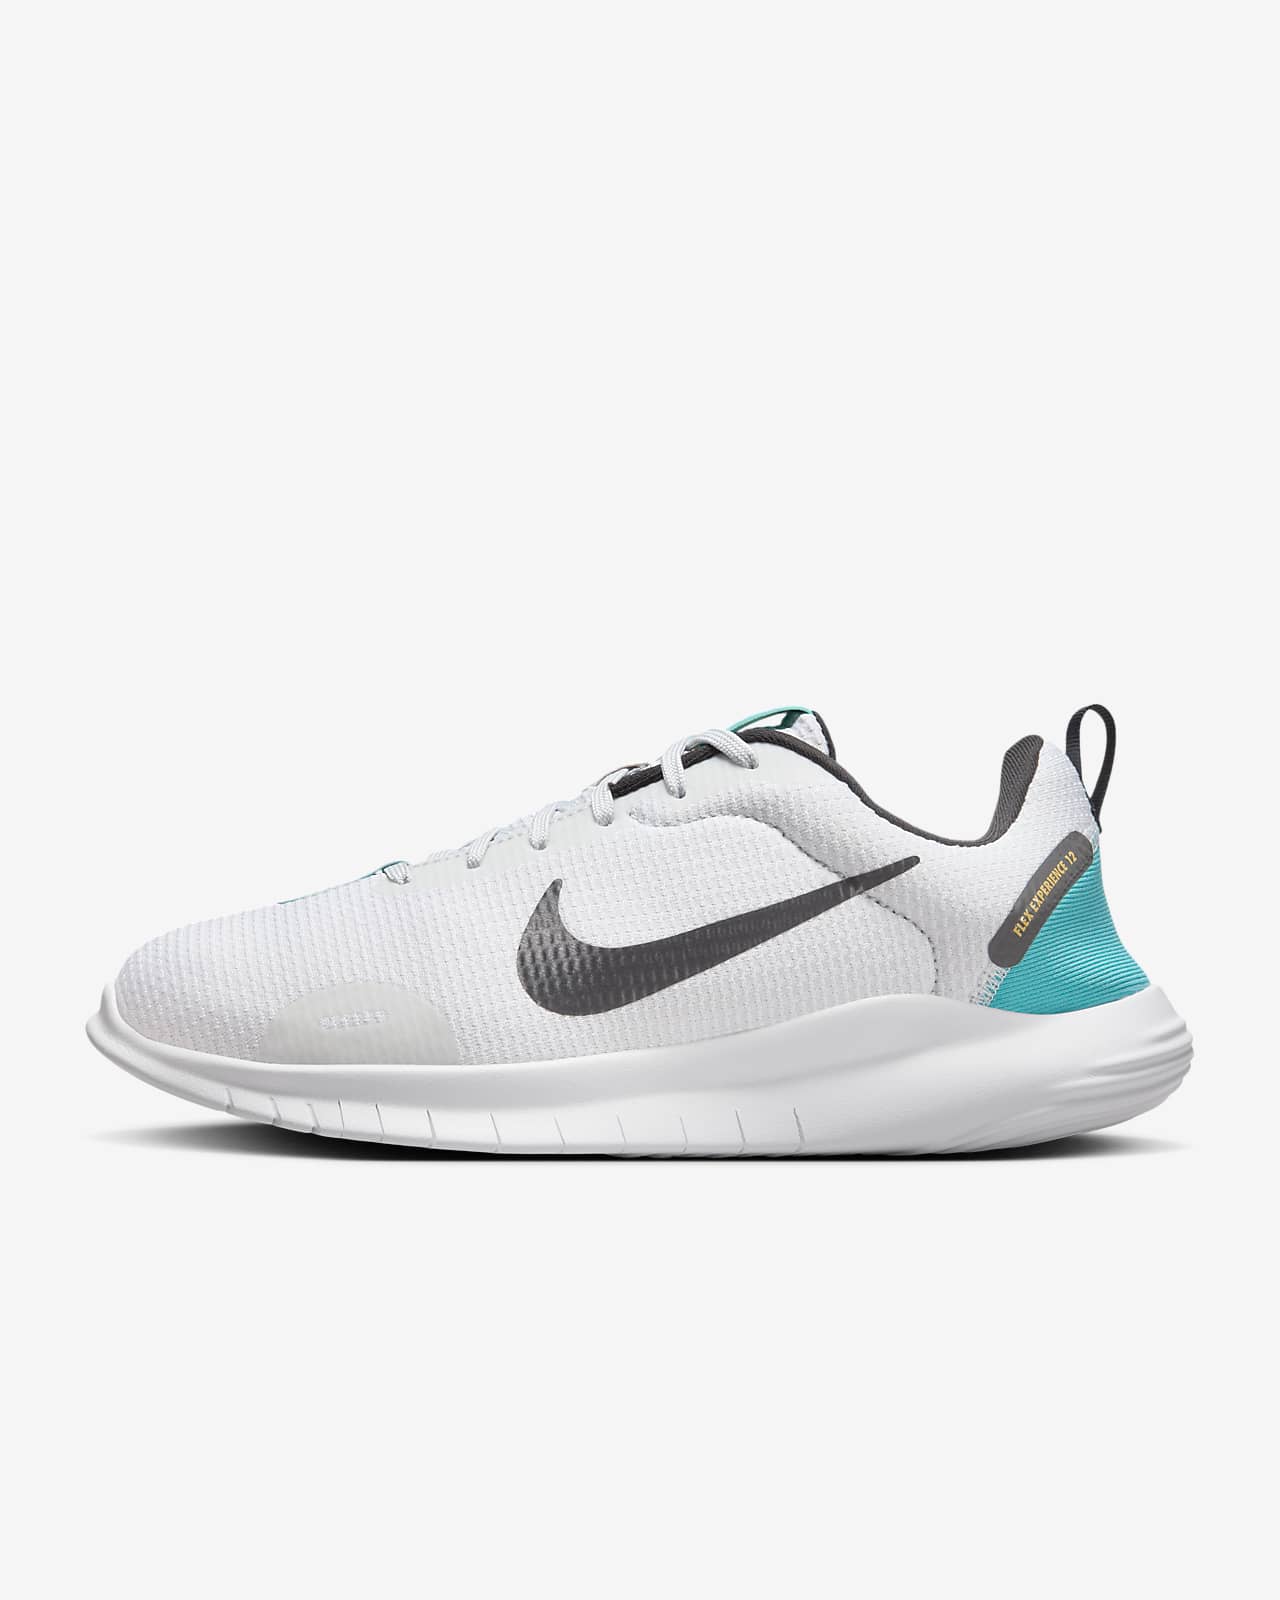 Nike Flex Experience Run 12 Women's Road Running Shoes (Extra Wide)